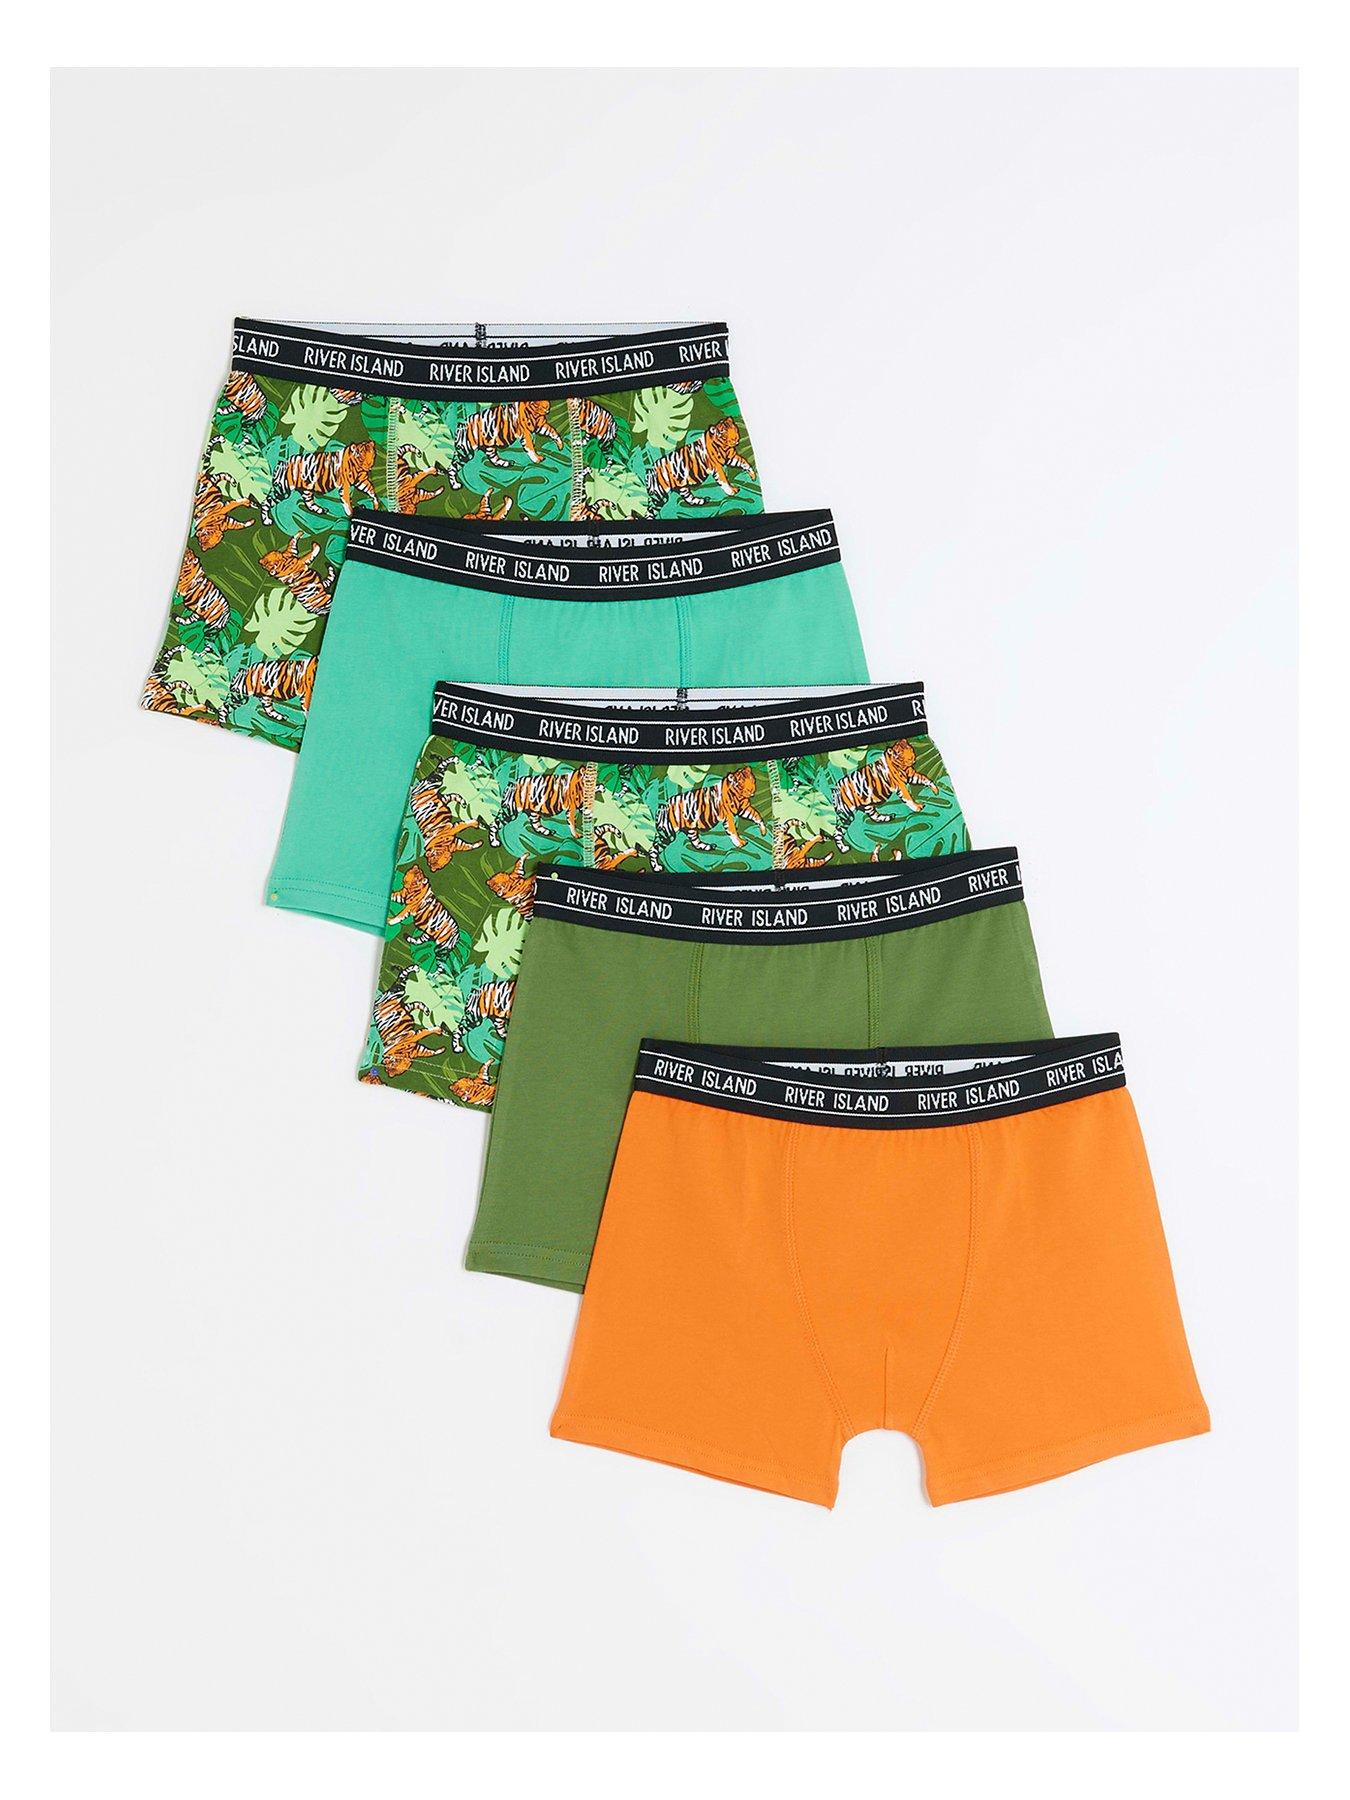 River Island Boys Tiger Print Boxers 5 Pack - Green